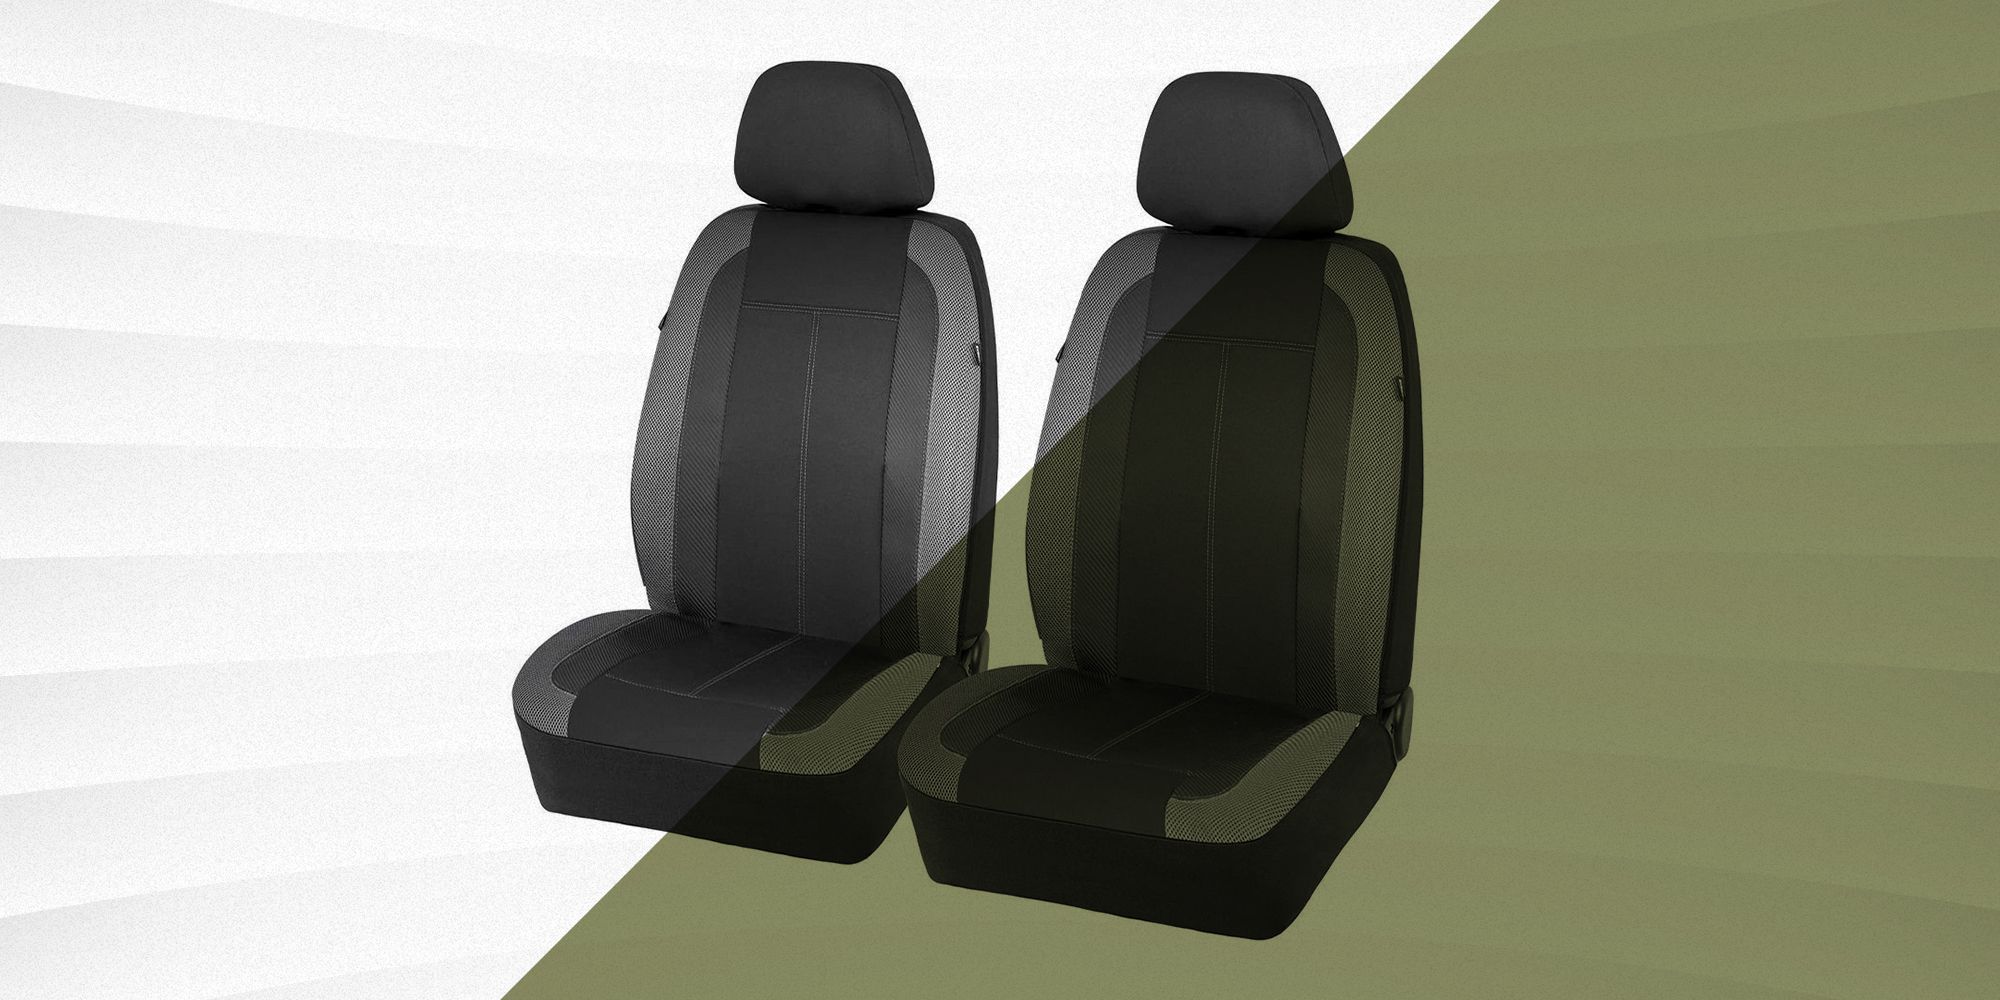 Bucket seats: What are their pros and cons?